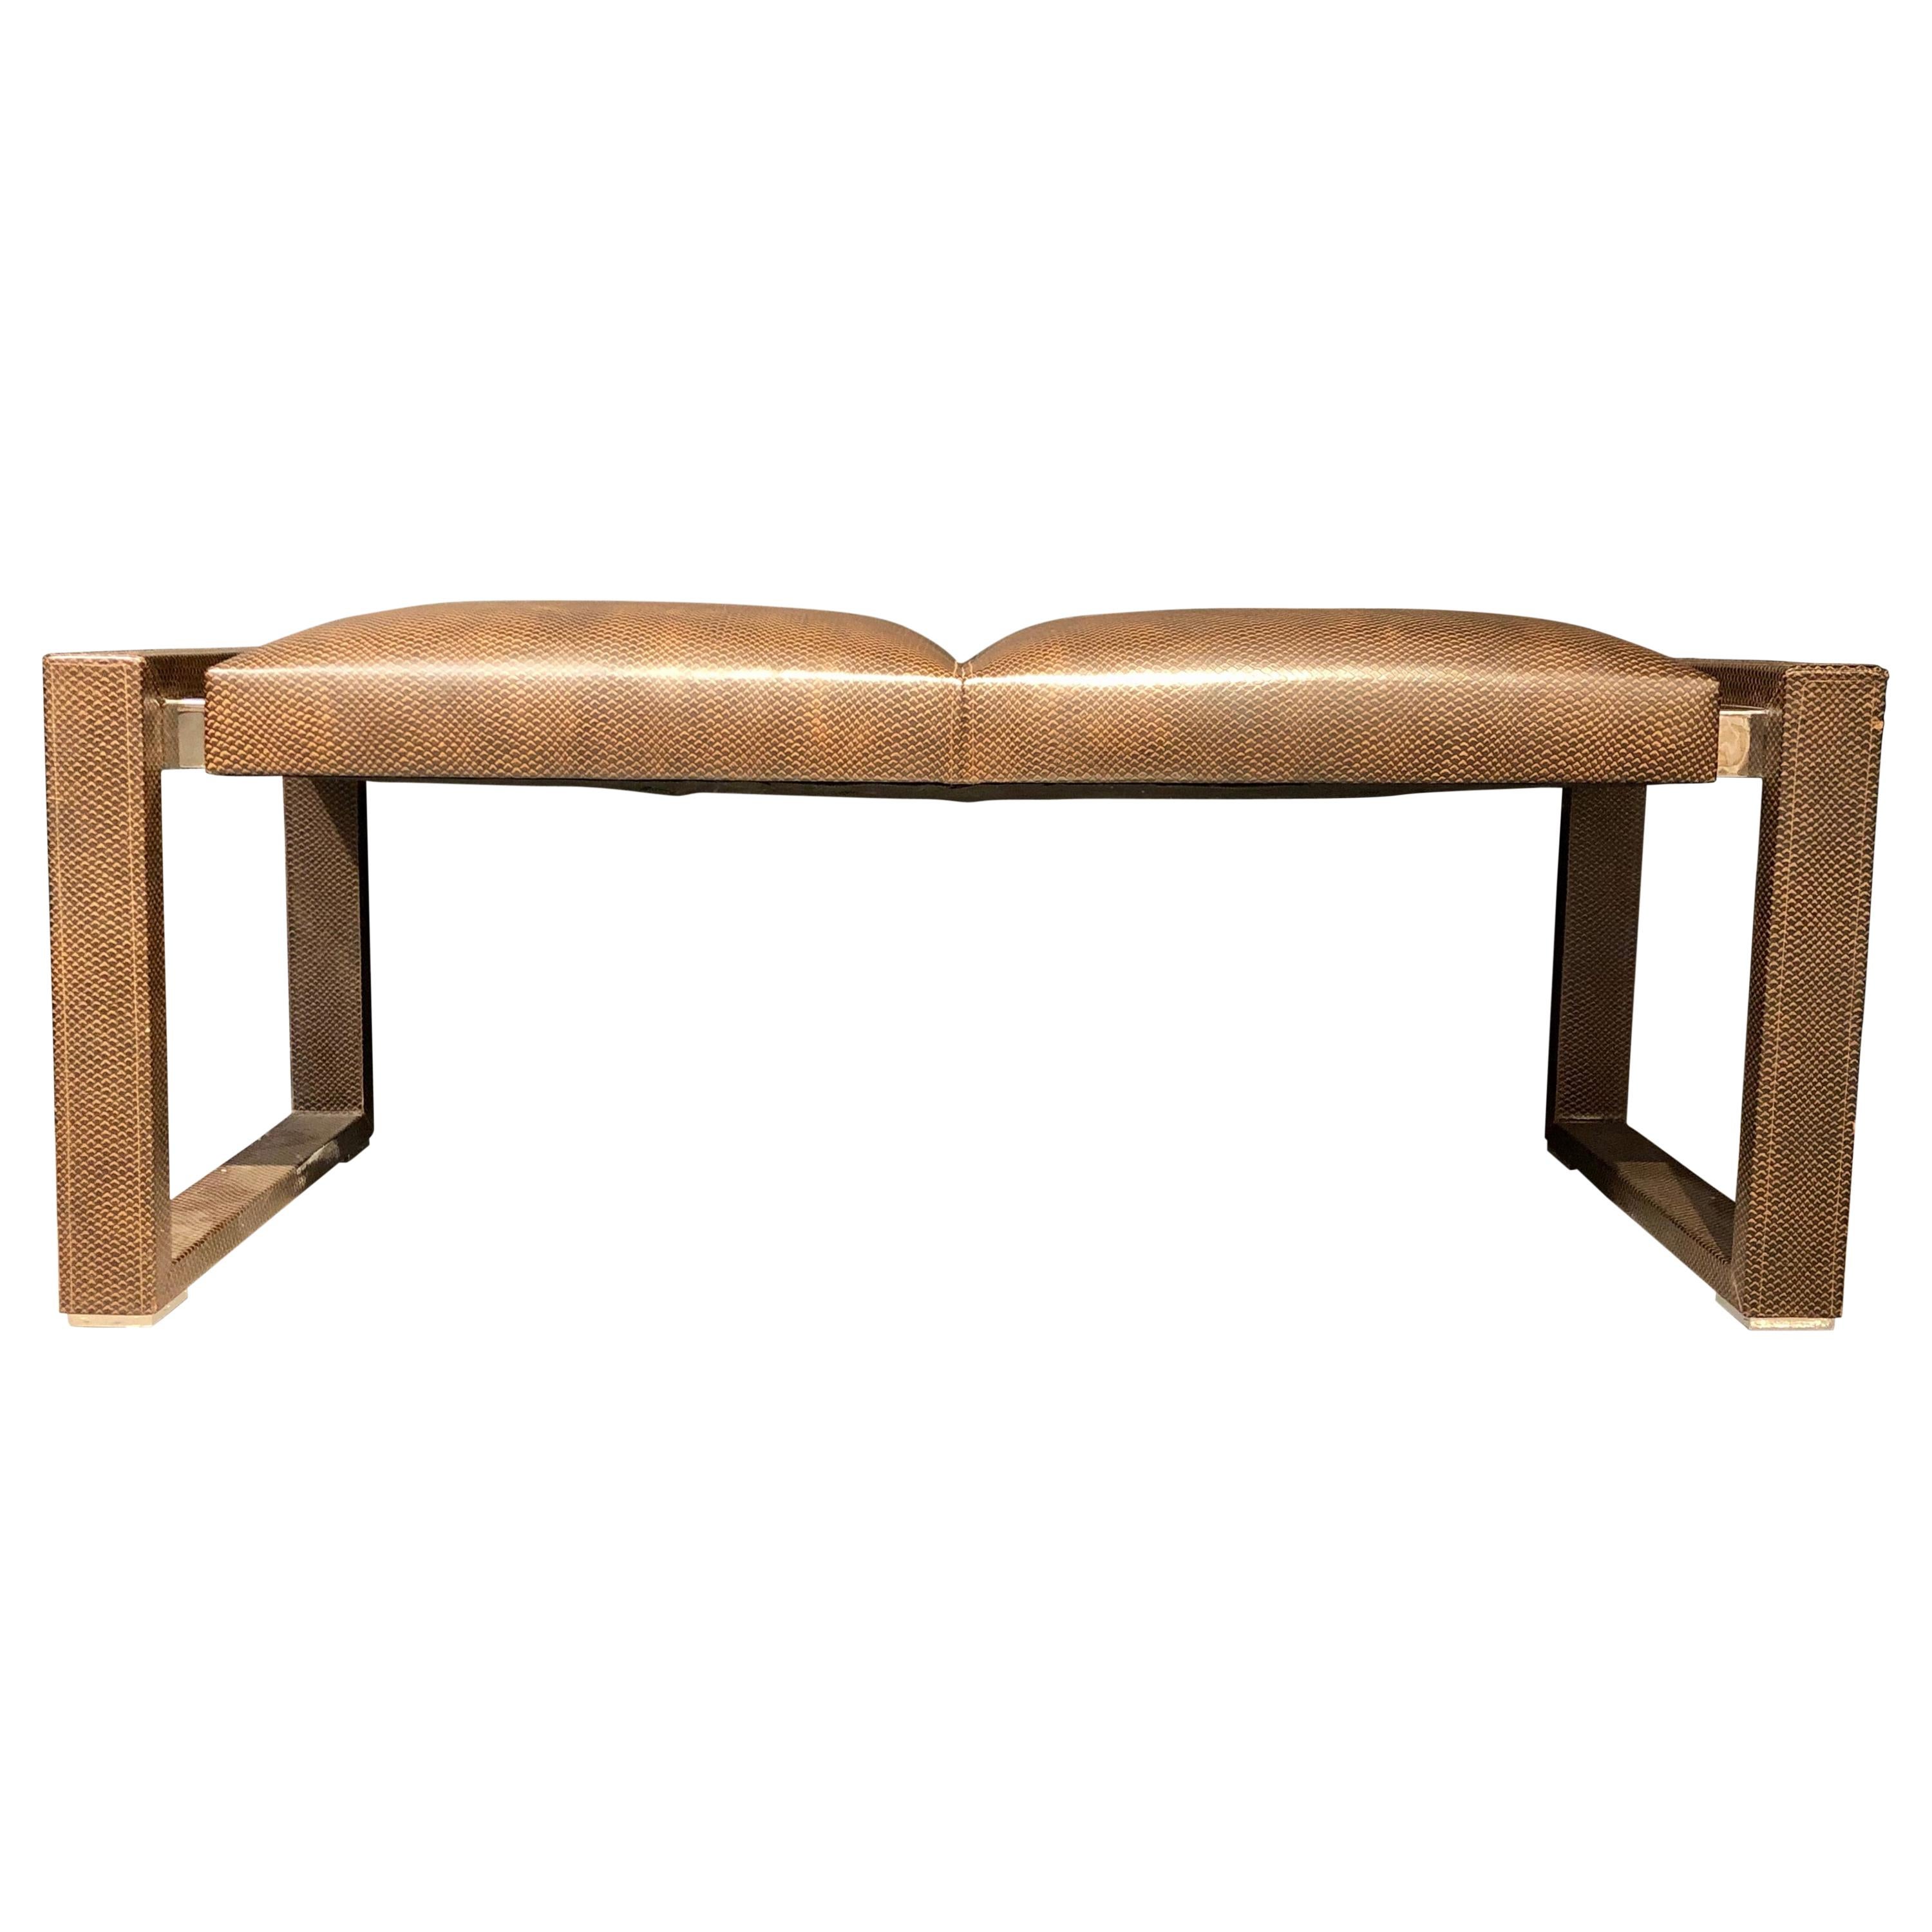 Loren Marsh Design Bench Embossed Leather and Polished Stainless Steel For Sale